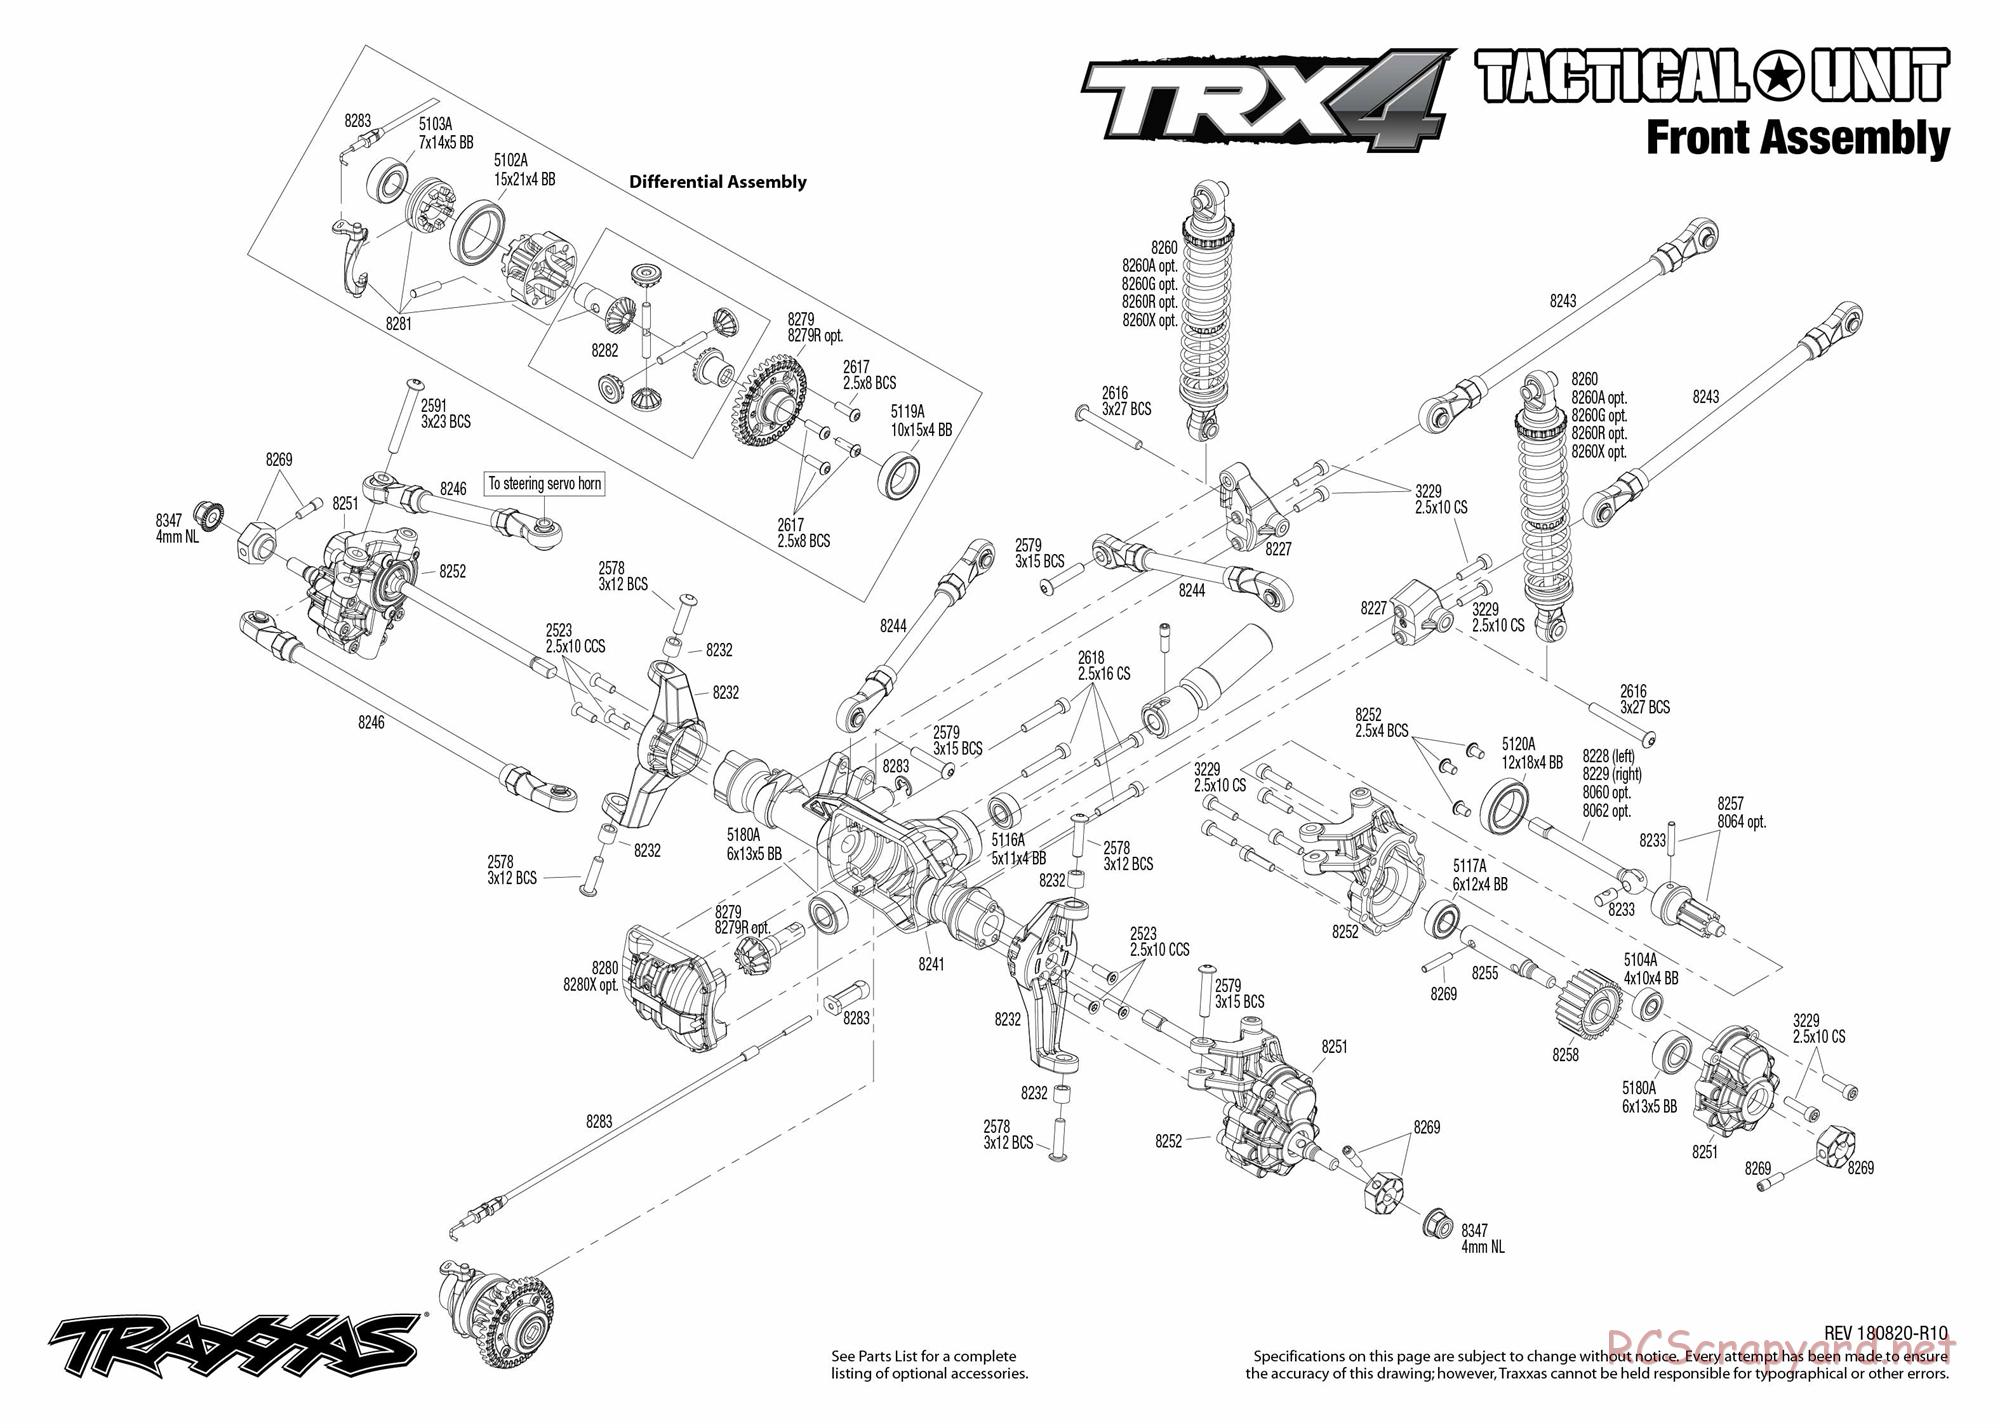 Traxxas - TRX-4 Tactical Unit (2018) - Exploded Views - Page 3